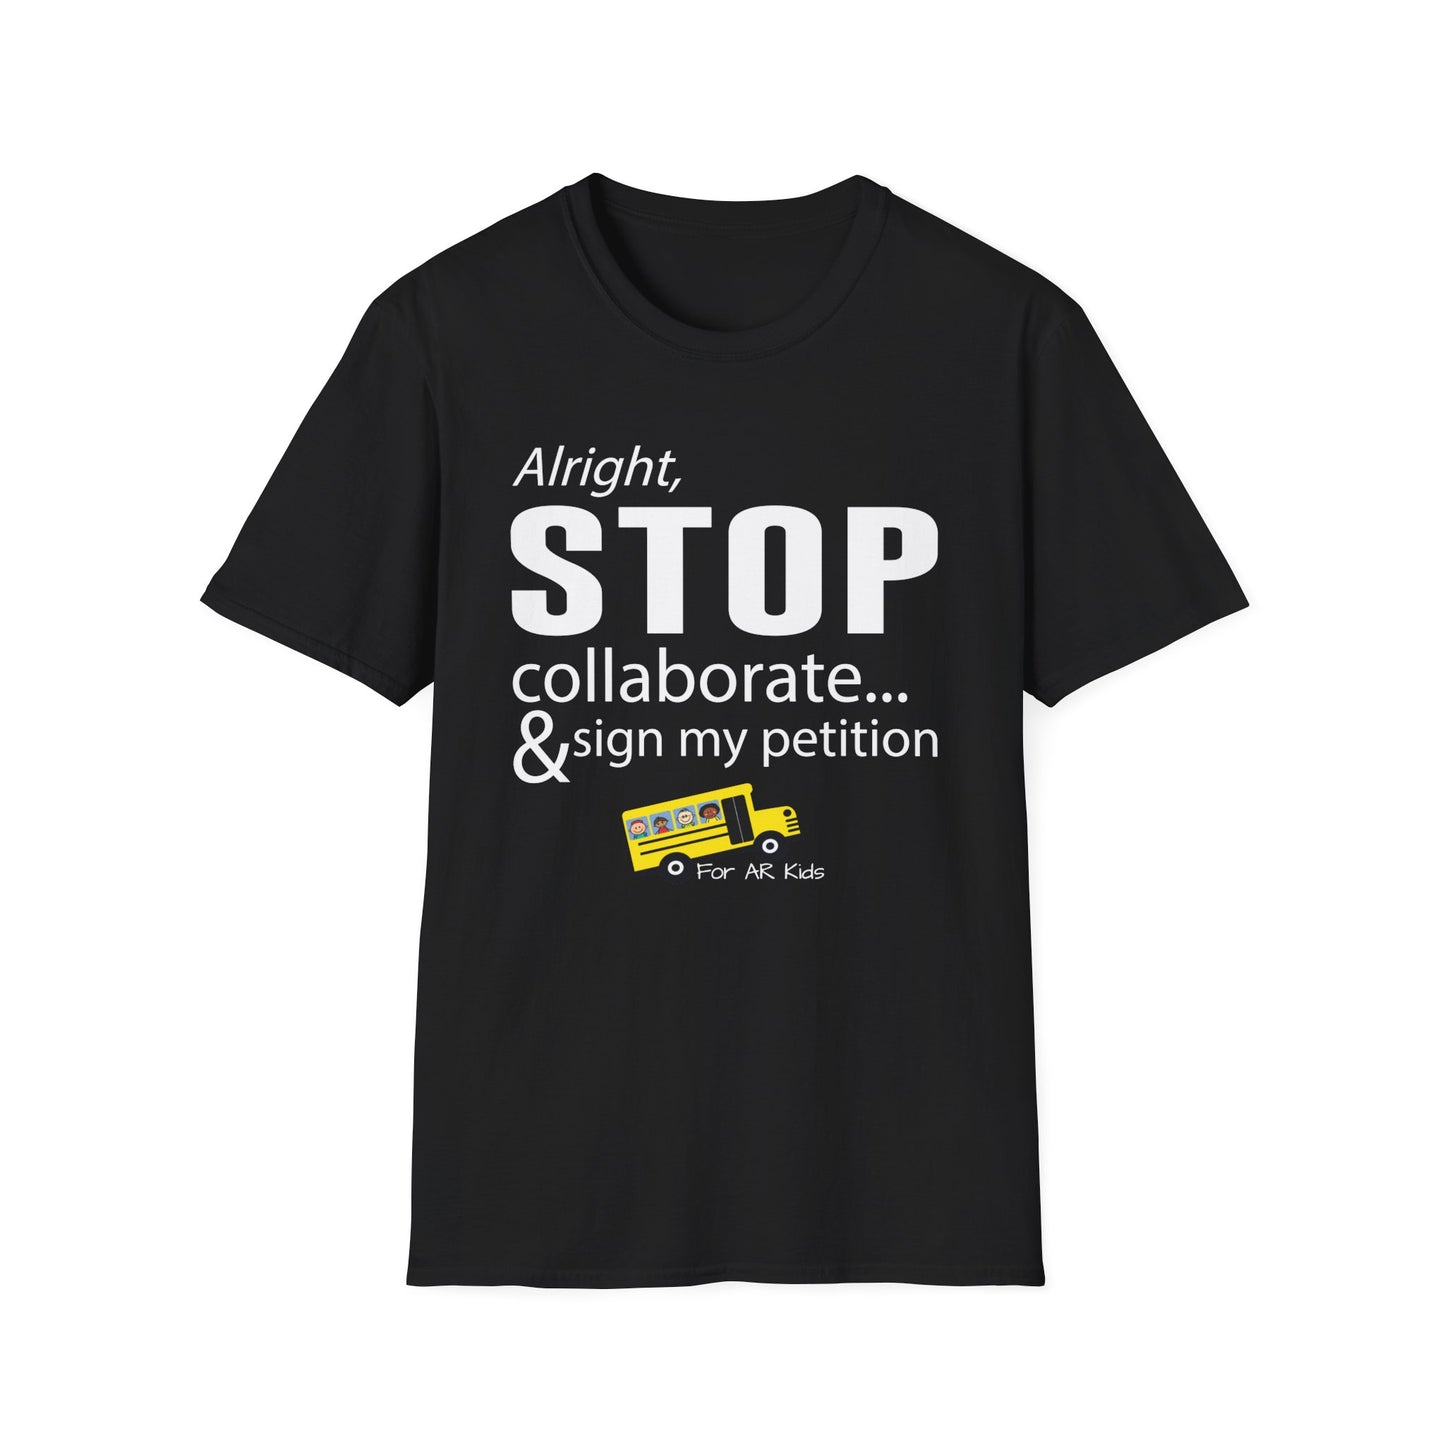 Alright Stop Collaborate and Sign My Petition Shirt, AR Kids Shirt, Funny Quote Shirt, Graphic Tee